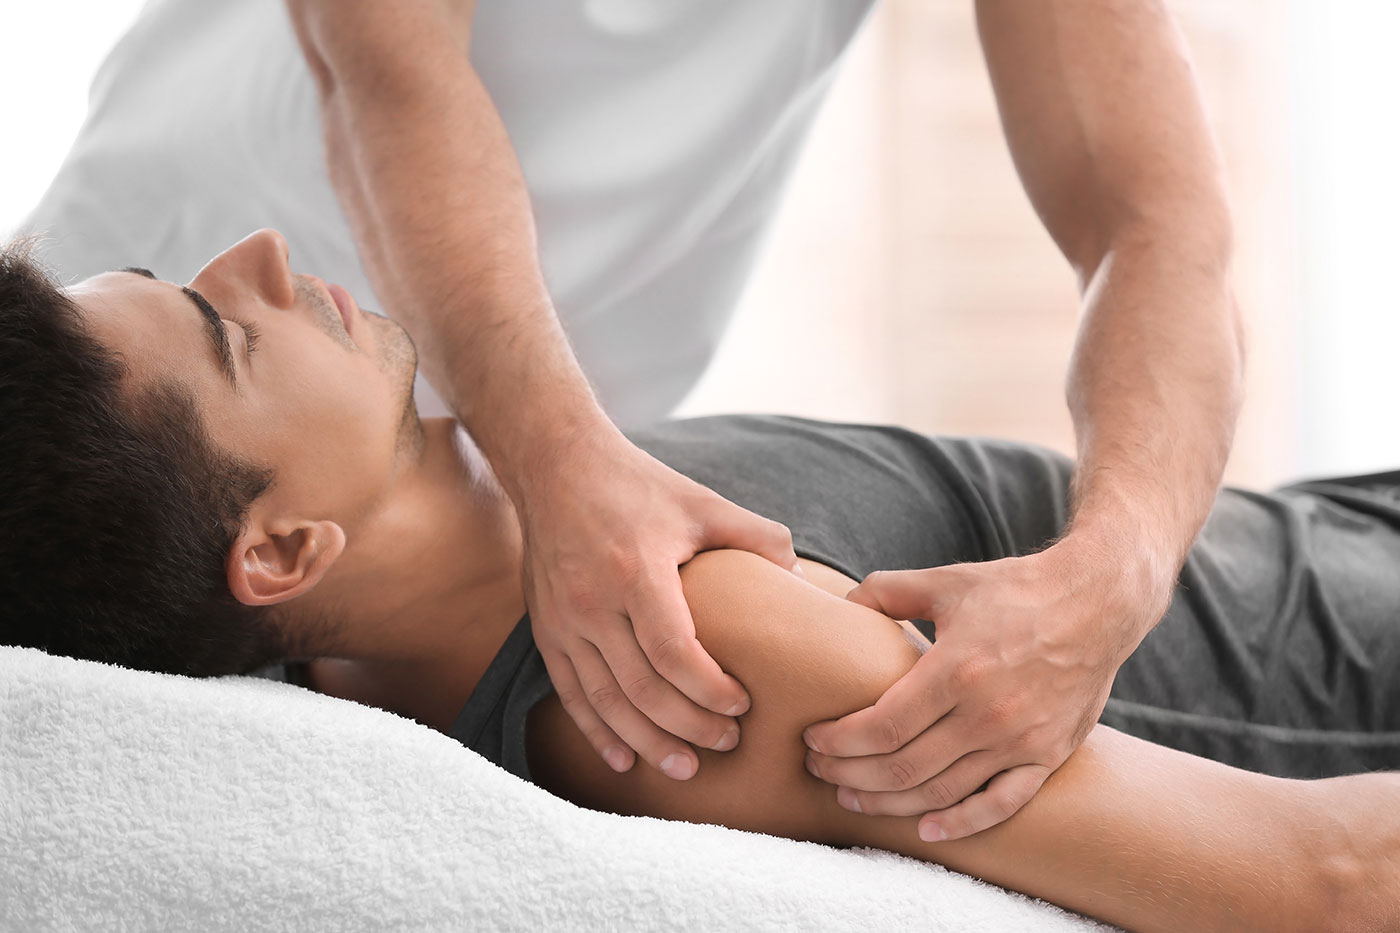 Top Reasons Soft Tissue Physical Therapy Is So Effective For Healing Injuries